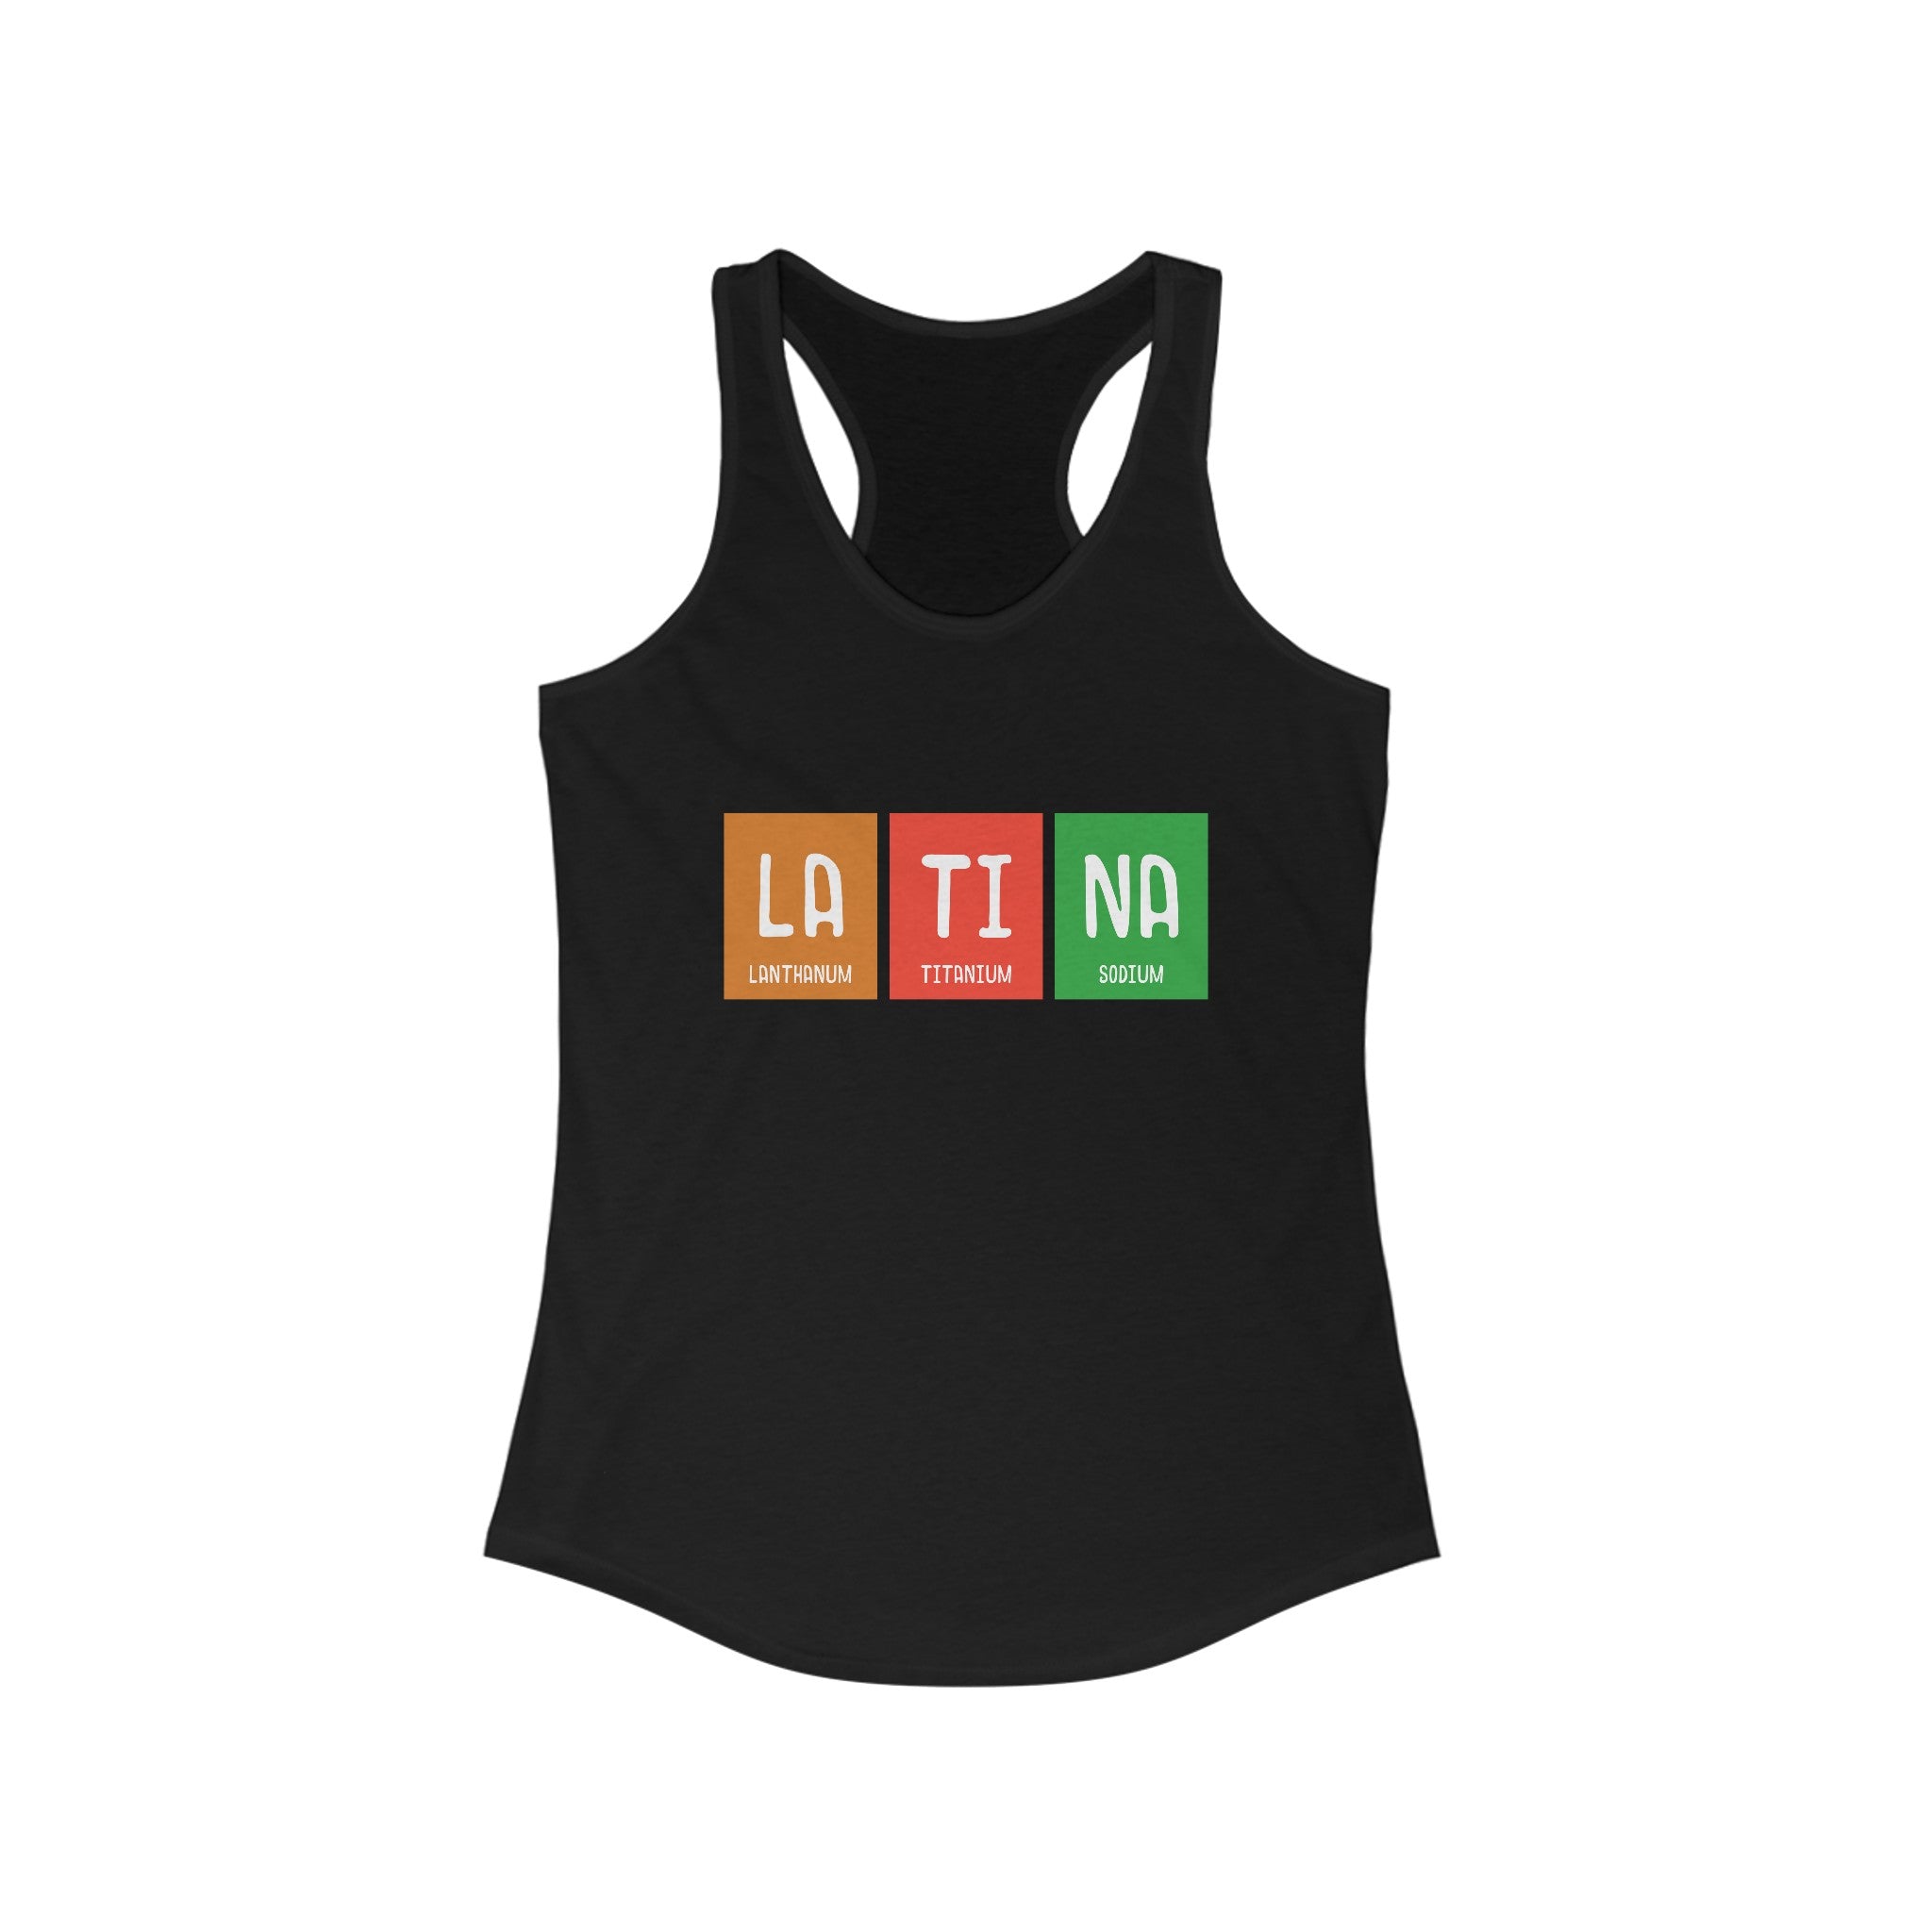 LA-TI-NA - Women's Racerback Tank with the word "LA-TI-NA" written in colorful blocks resembling the periodic table, each block featuring an element's symbol and name—perfect for showcasing pride while embracing an active lifestyle.